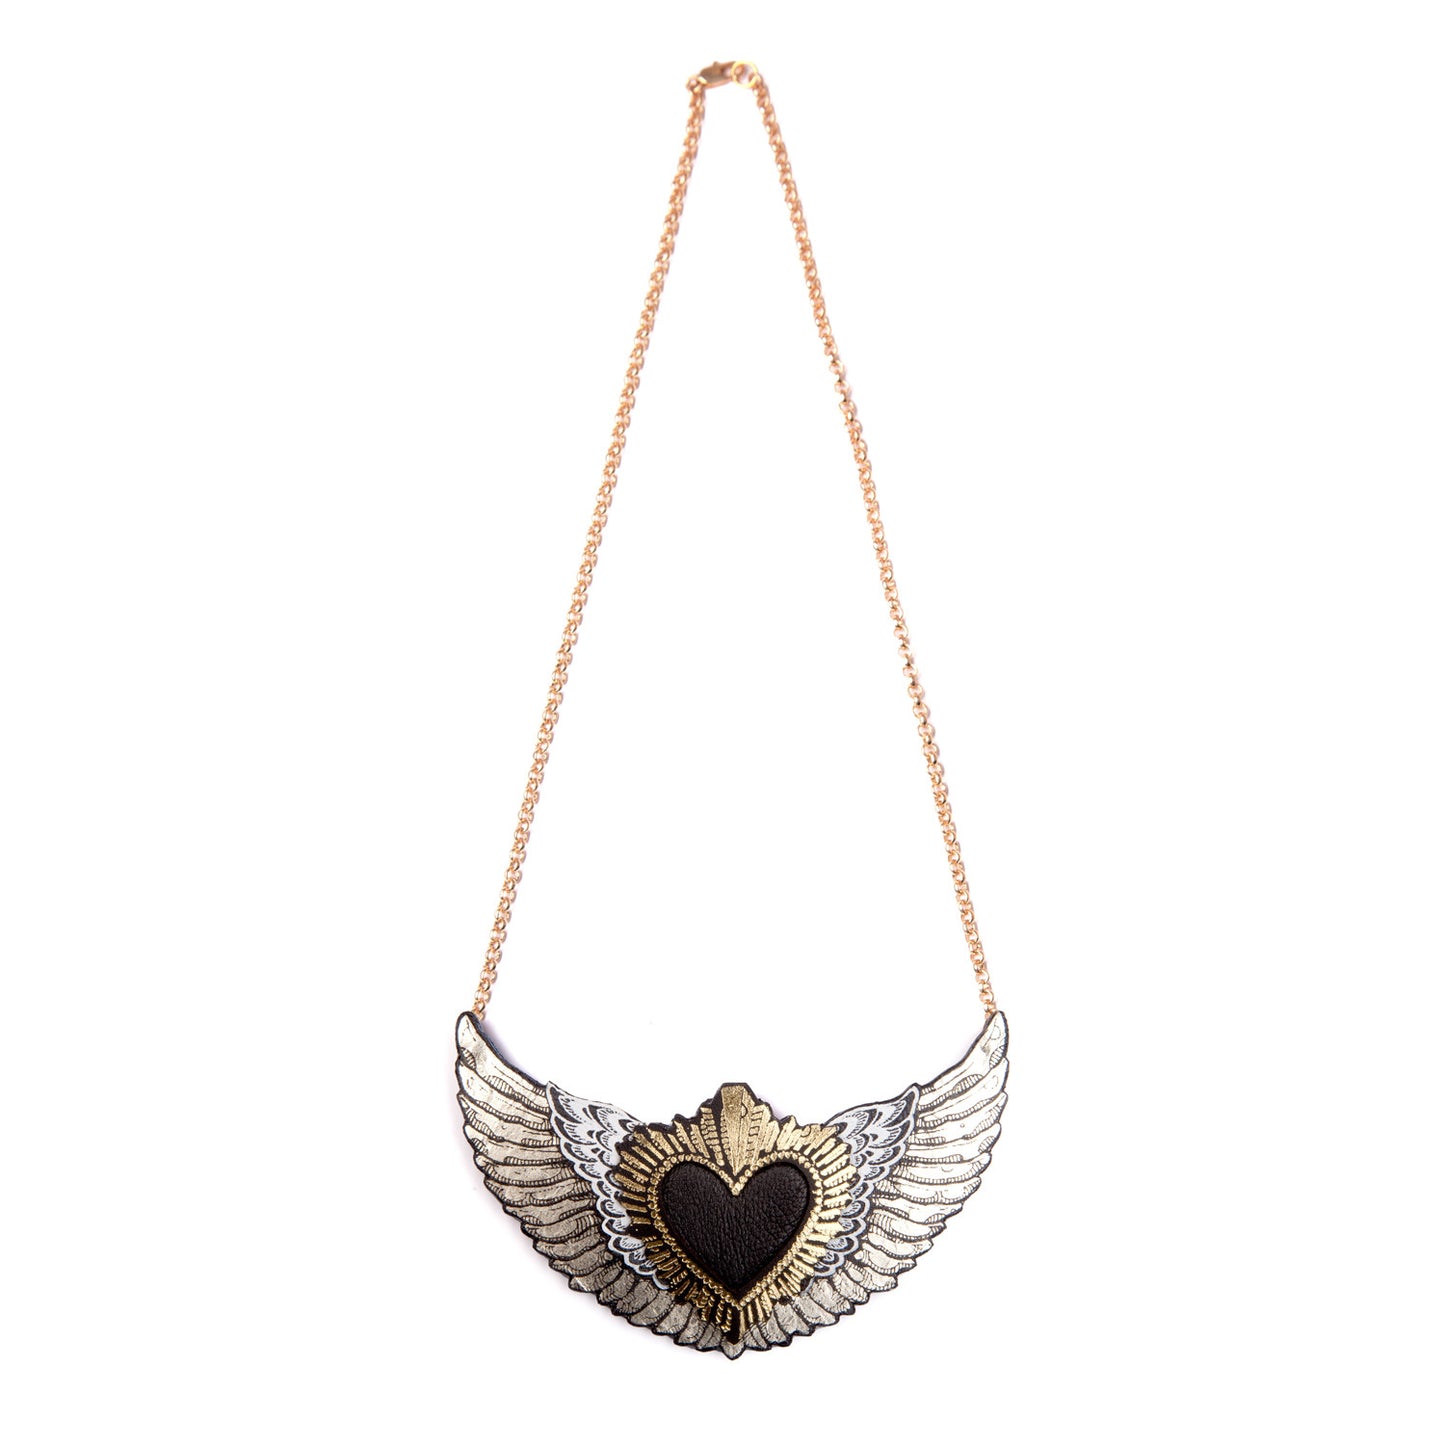 WINGED HEART . necklace